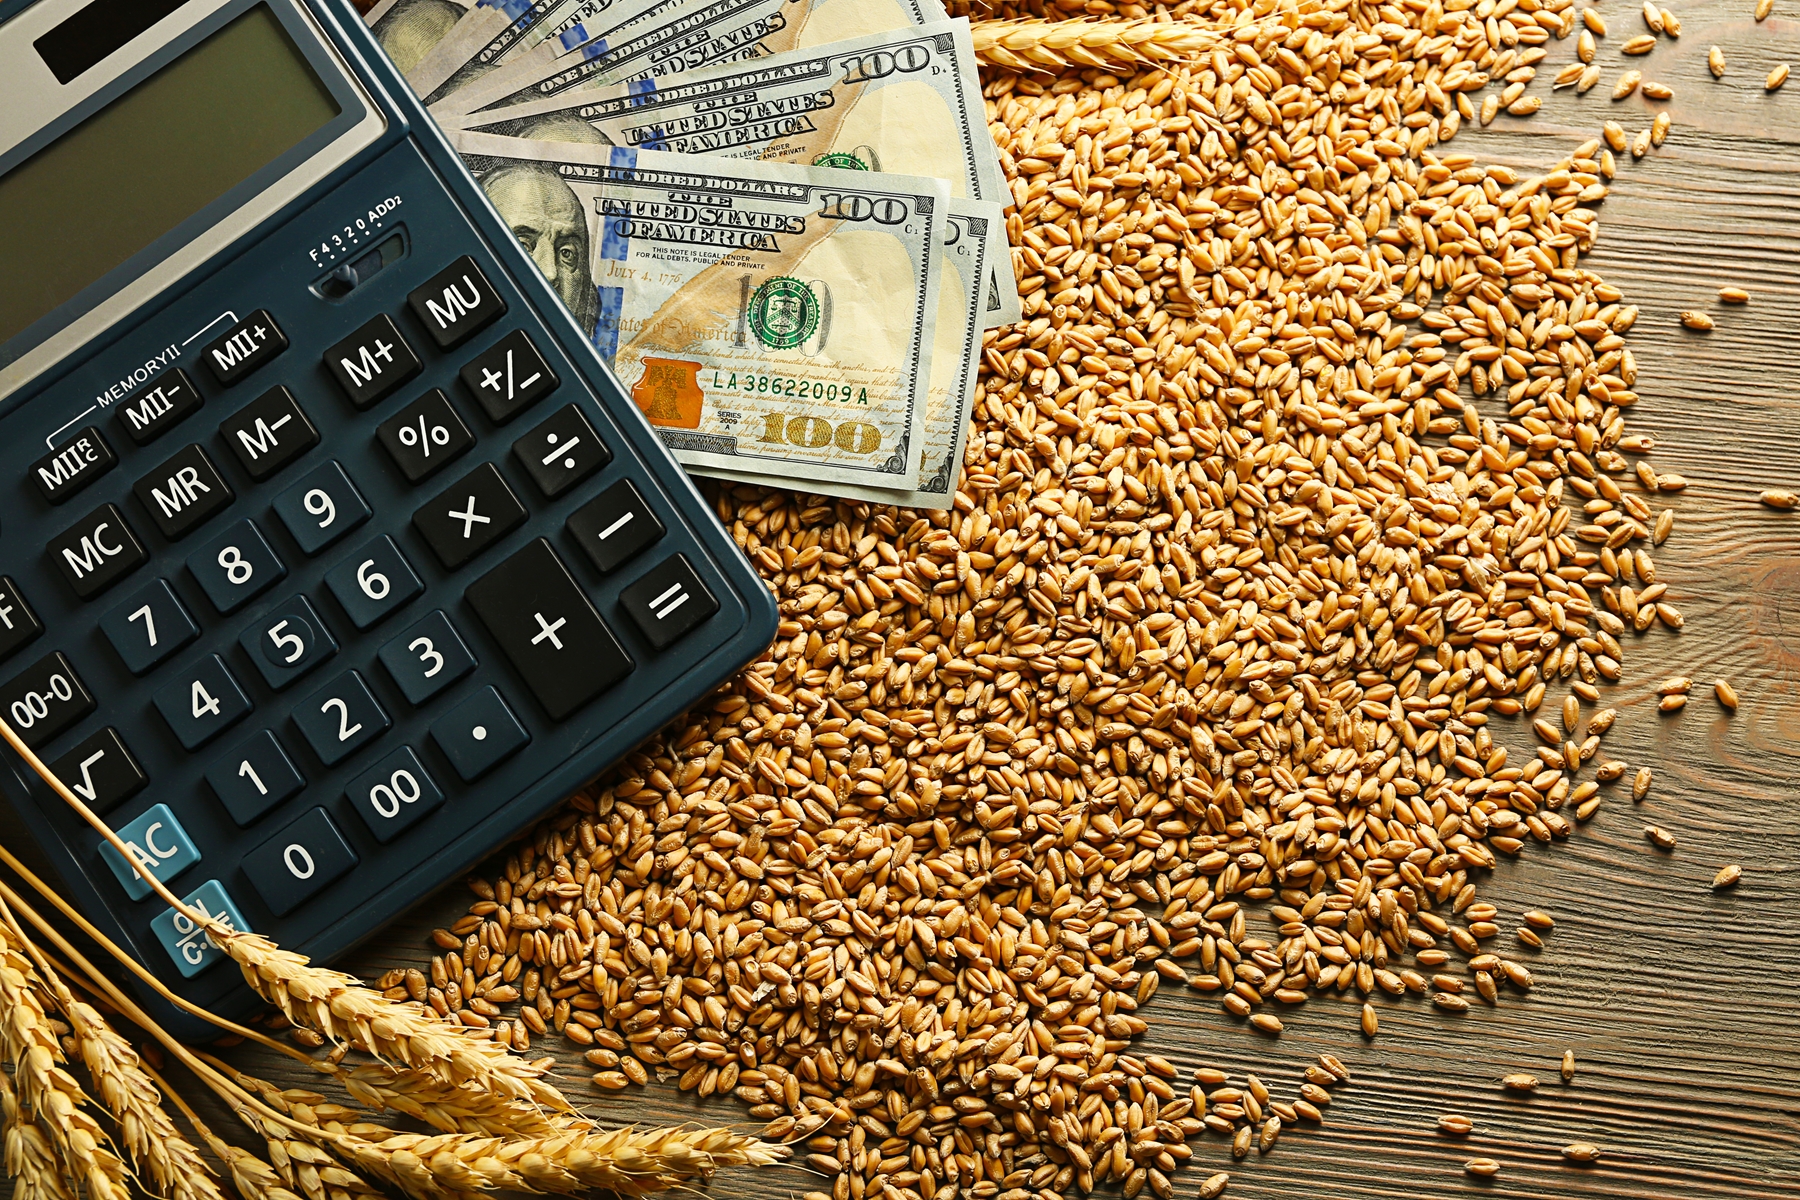 Calculator and Money atop a pile of wheat and seeds